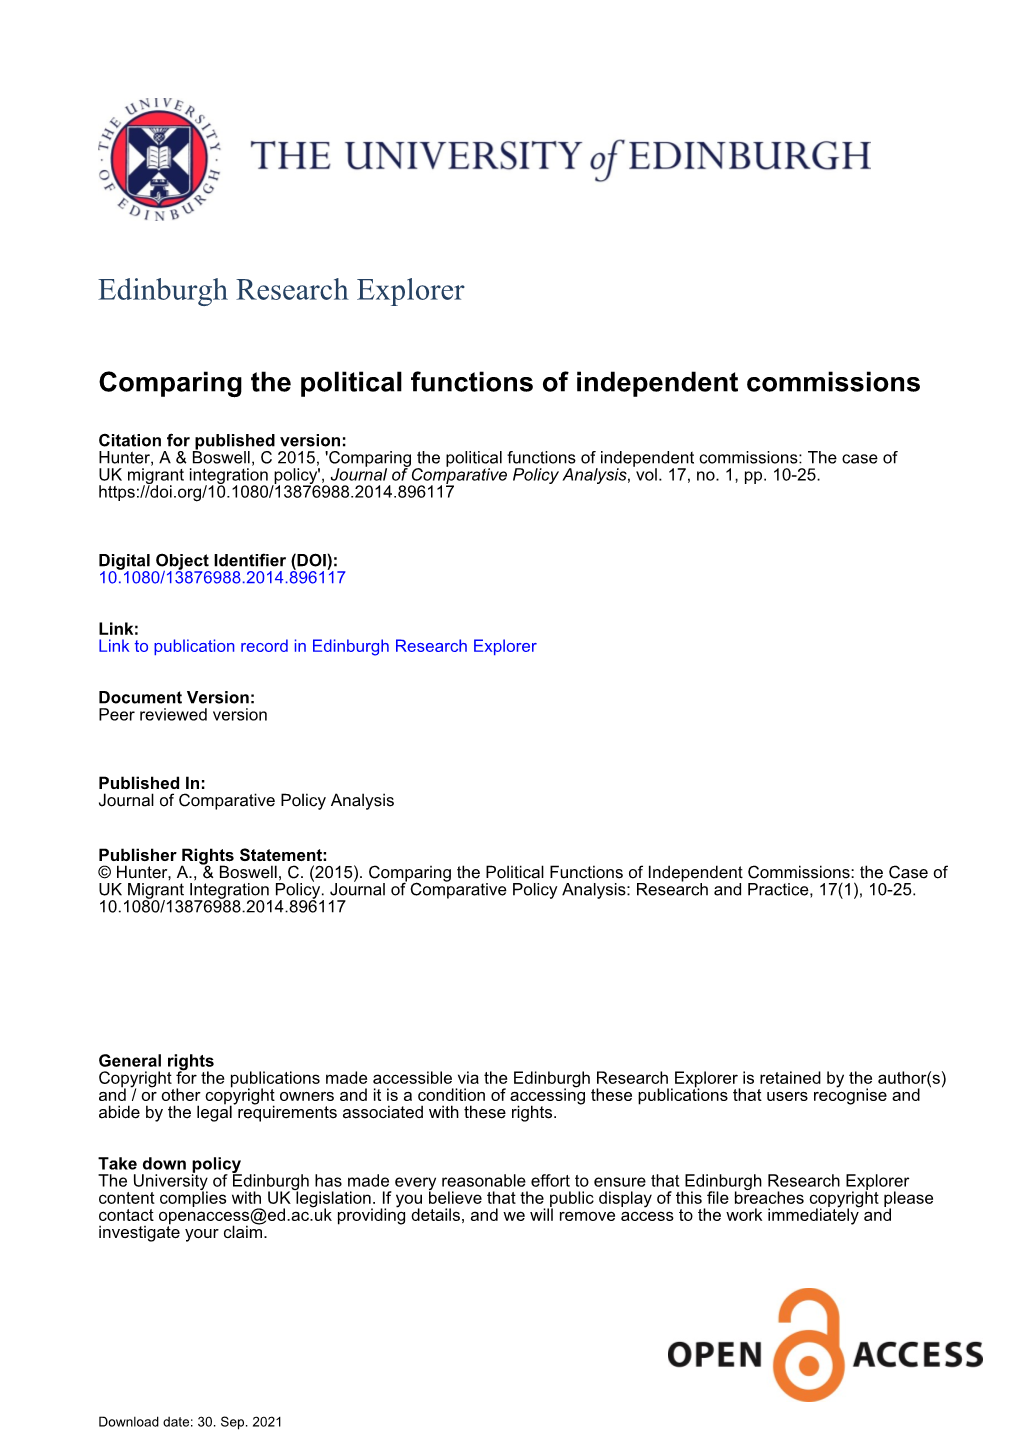 The Political Functions of Independent Commissions: the Case of UK Migrant Integration Policy', Journal of Comparative Policy Analysis, Vol